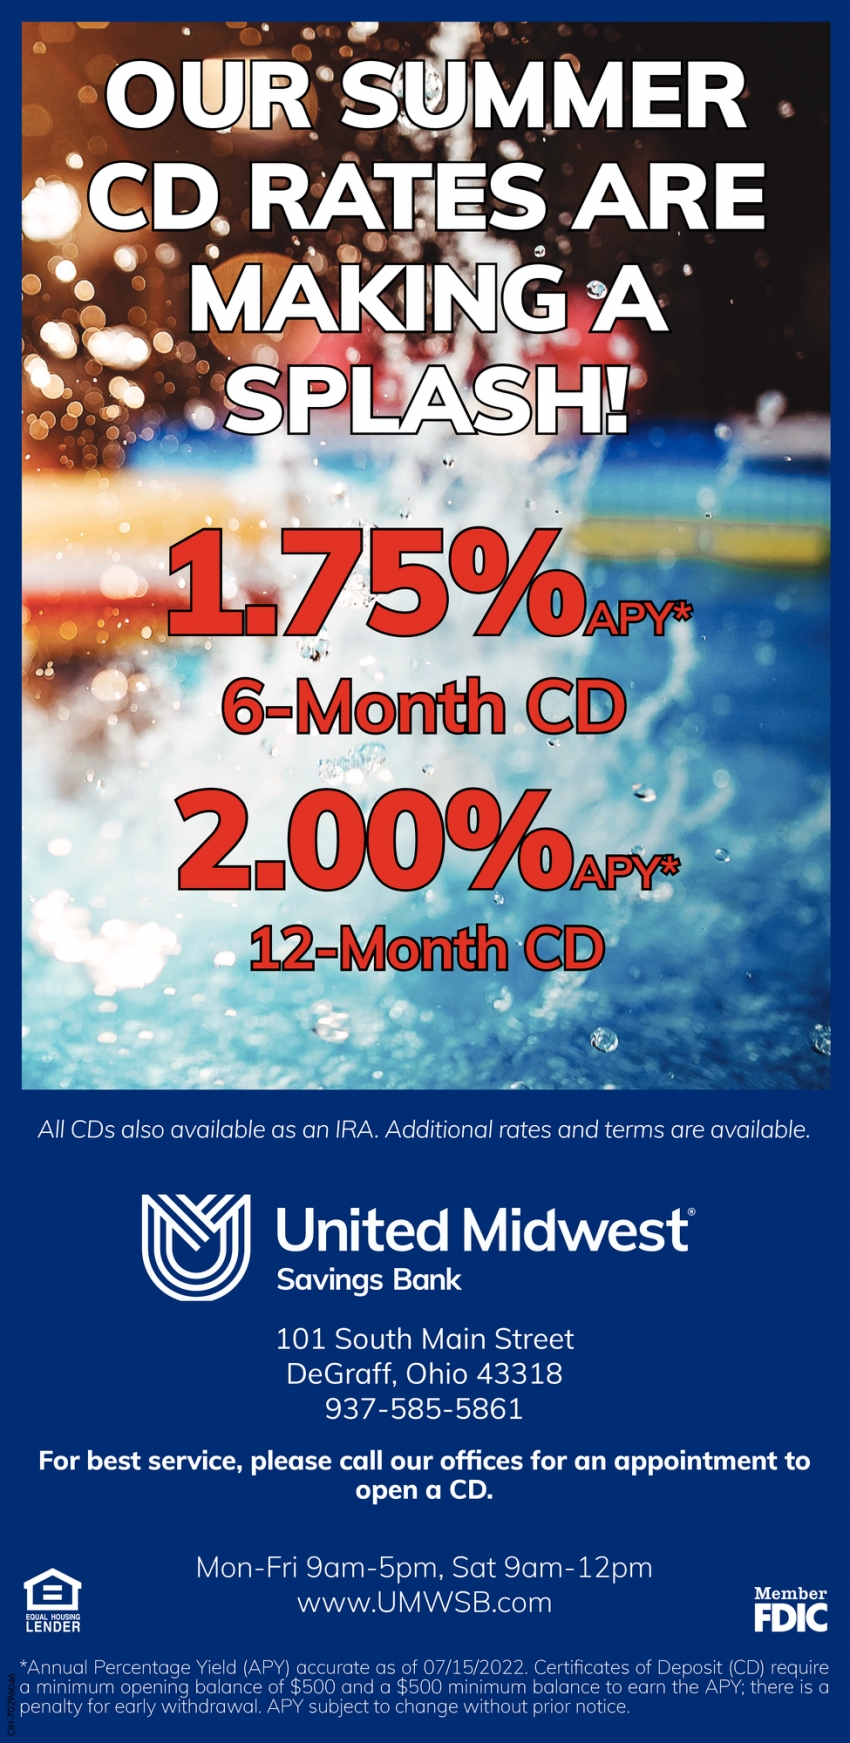 Our Summer Rates Are Making A Splash